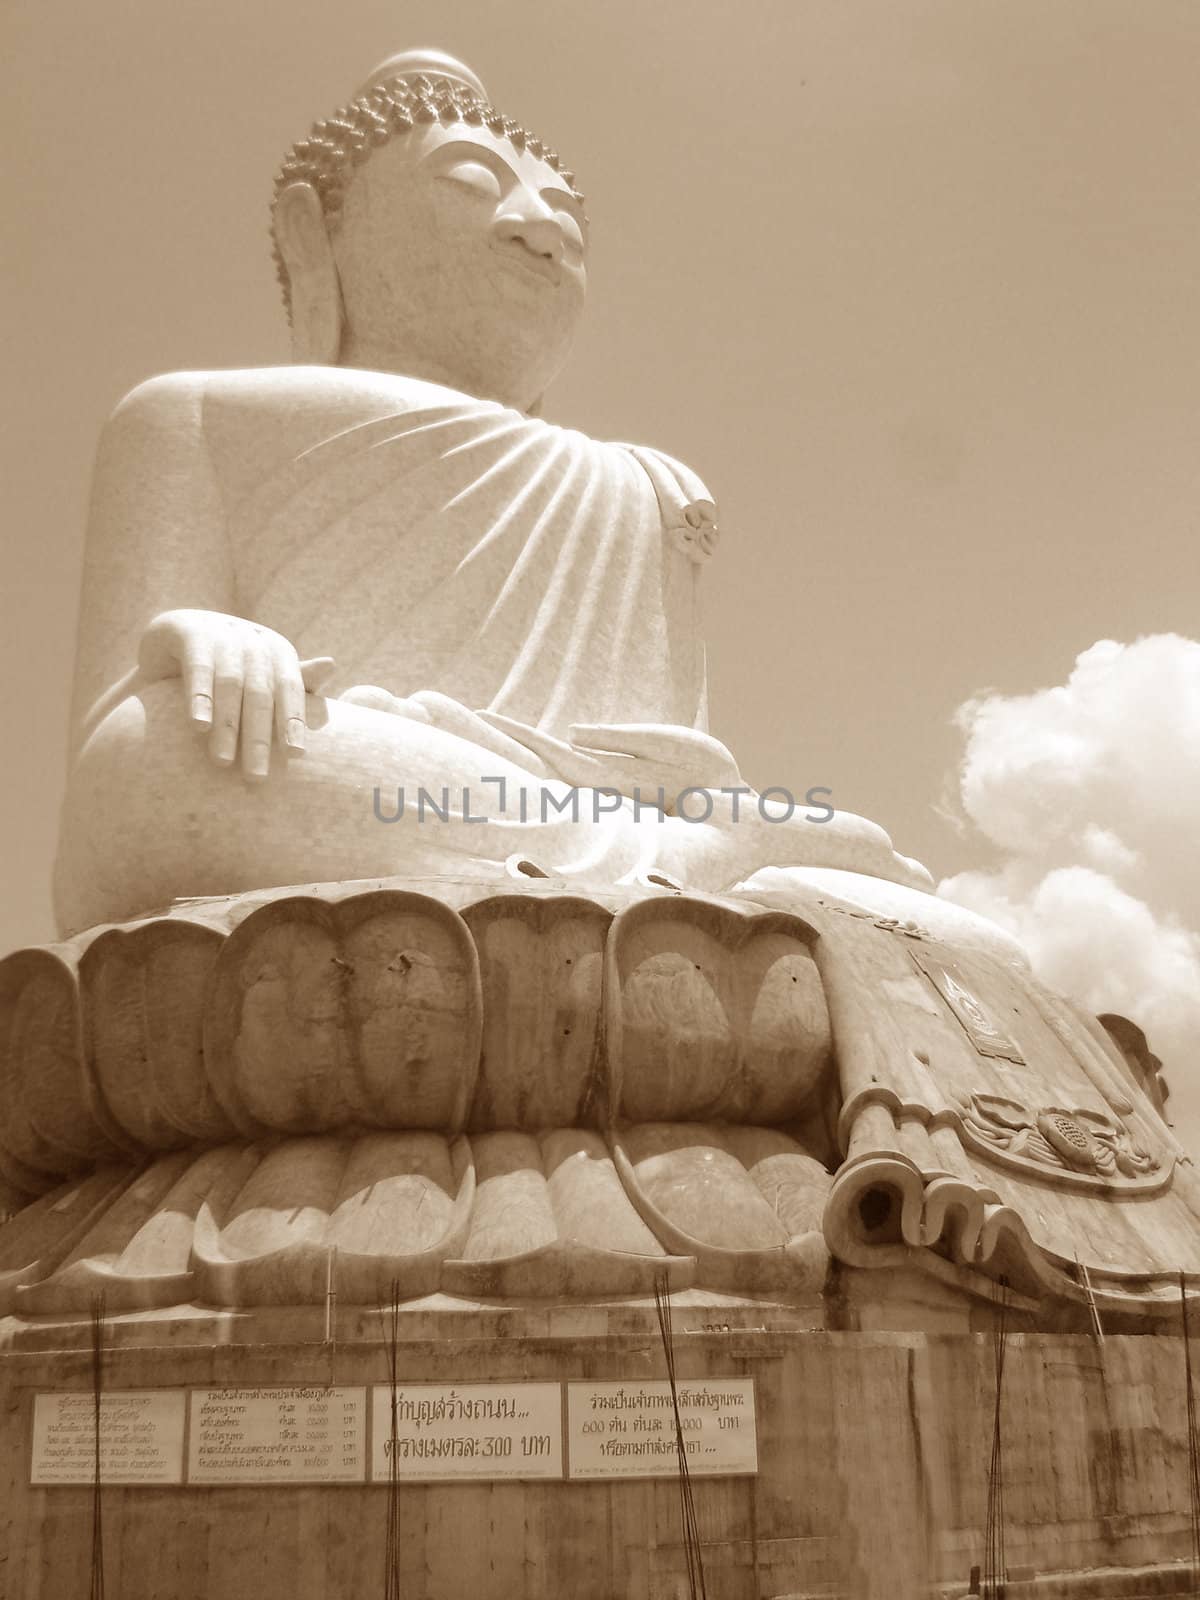 A vintage picture of a huge Buddha sculpture in Bangkok, Thailand.